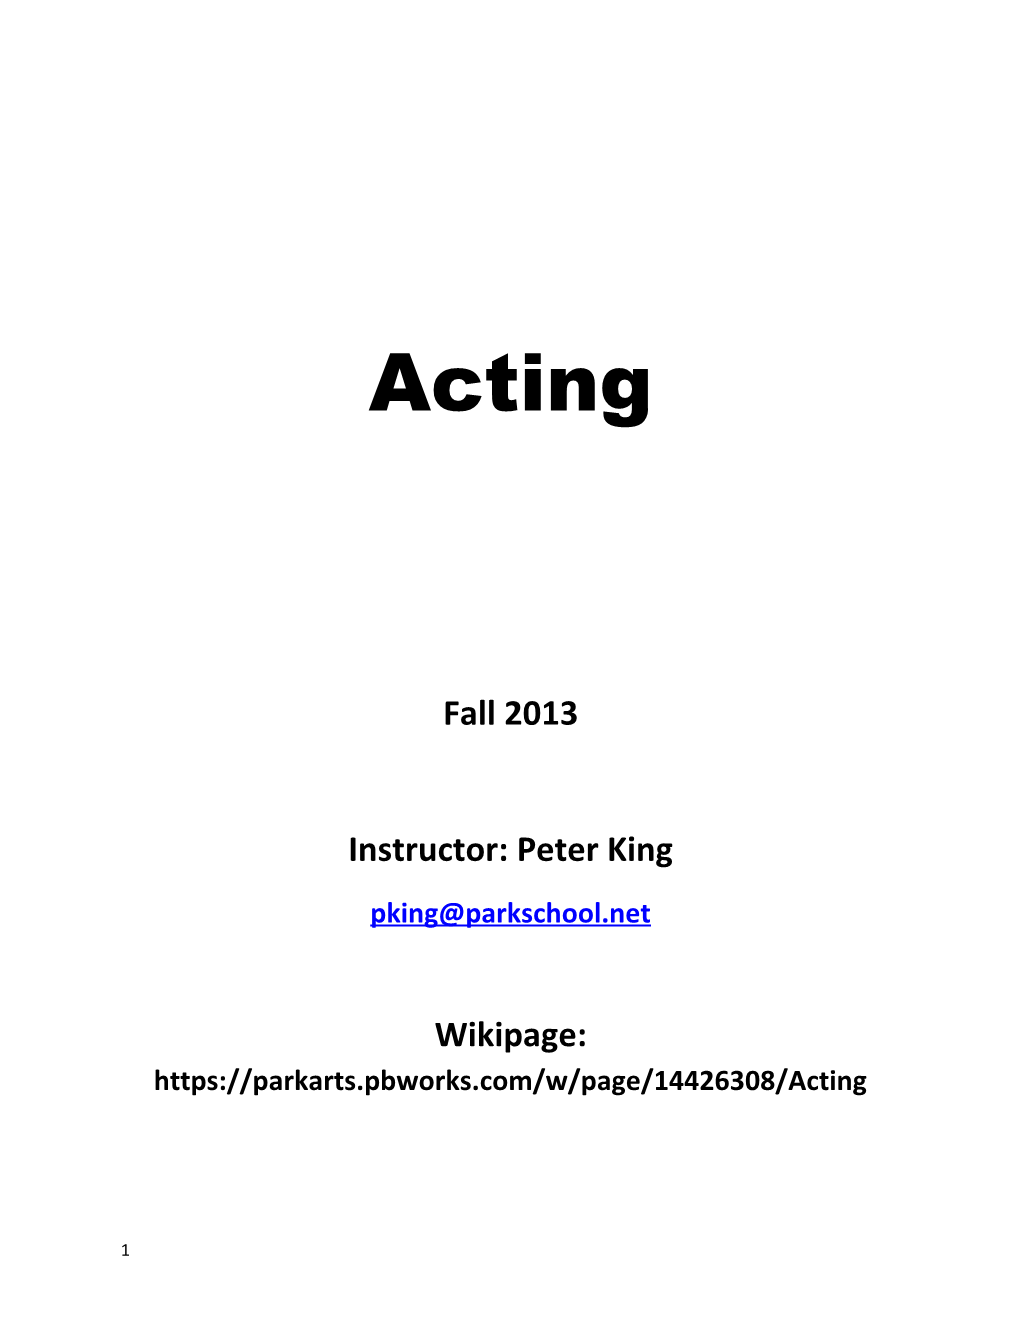 Instructor: Peter King